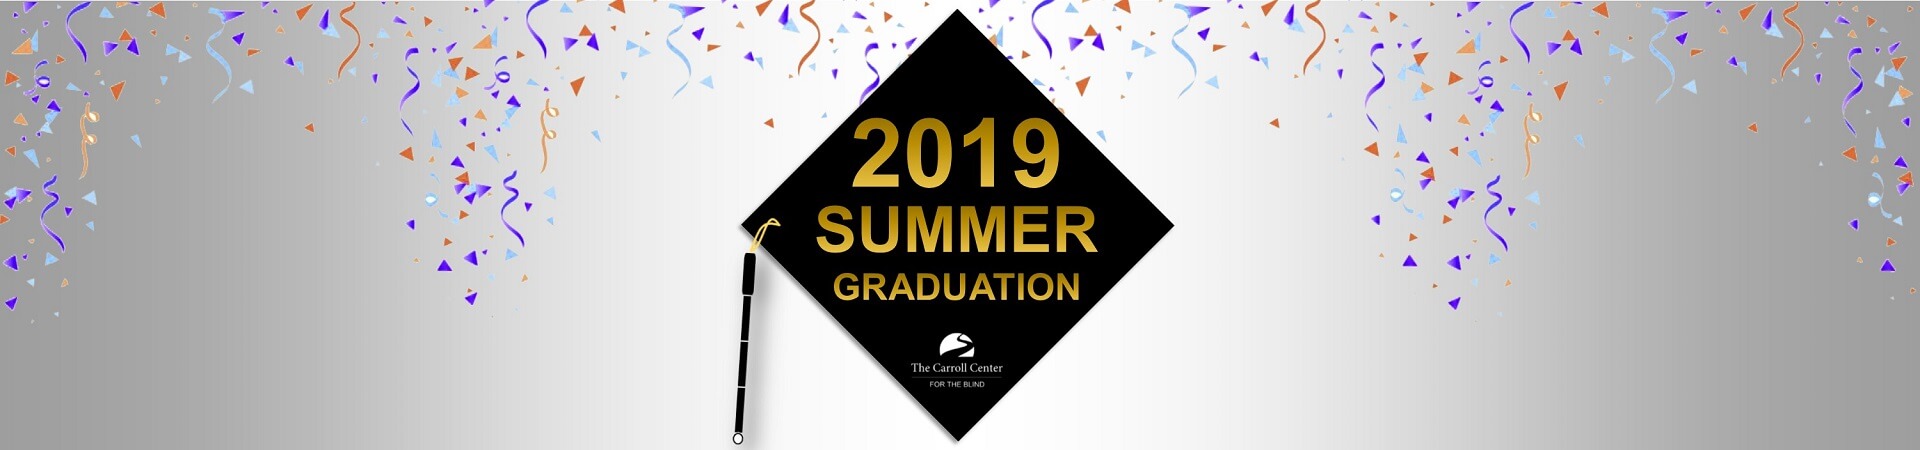 The text "2019 Summer Graduation" is superimposed on top of a mortarboard with a white mobility cane for a tassel.